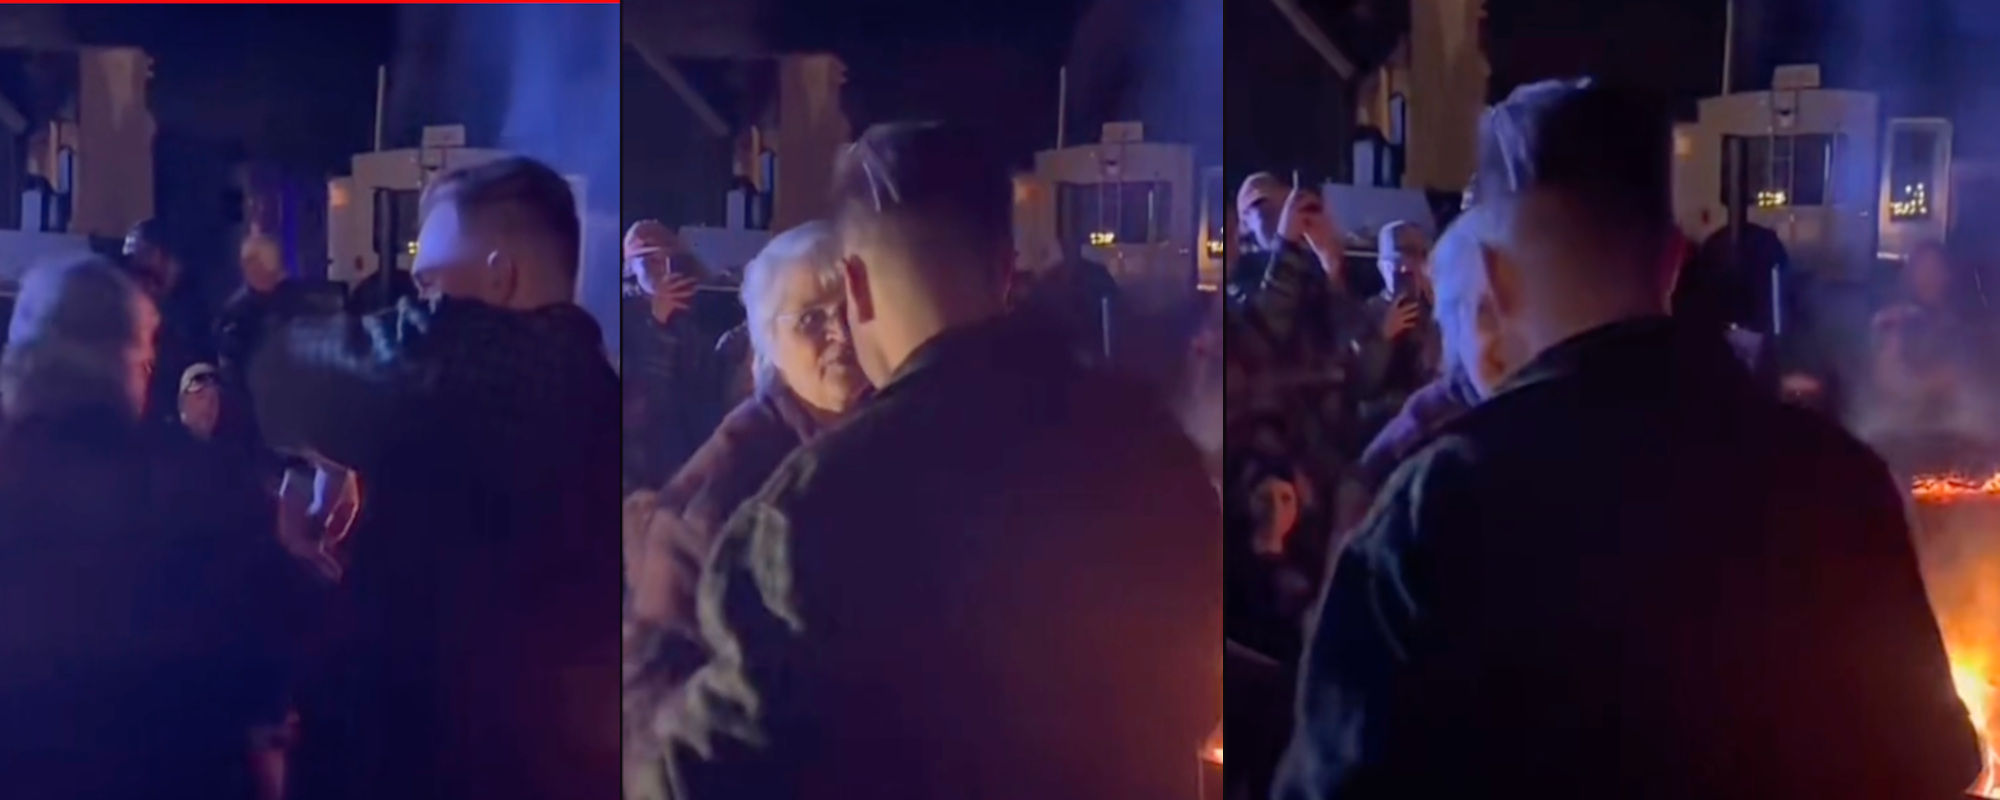 Zach Bryan Stirs Up Emotions as He Shares a Dance with His Grandmother